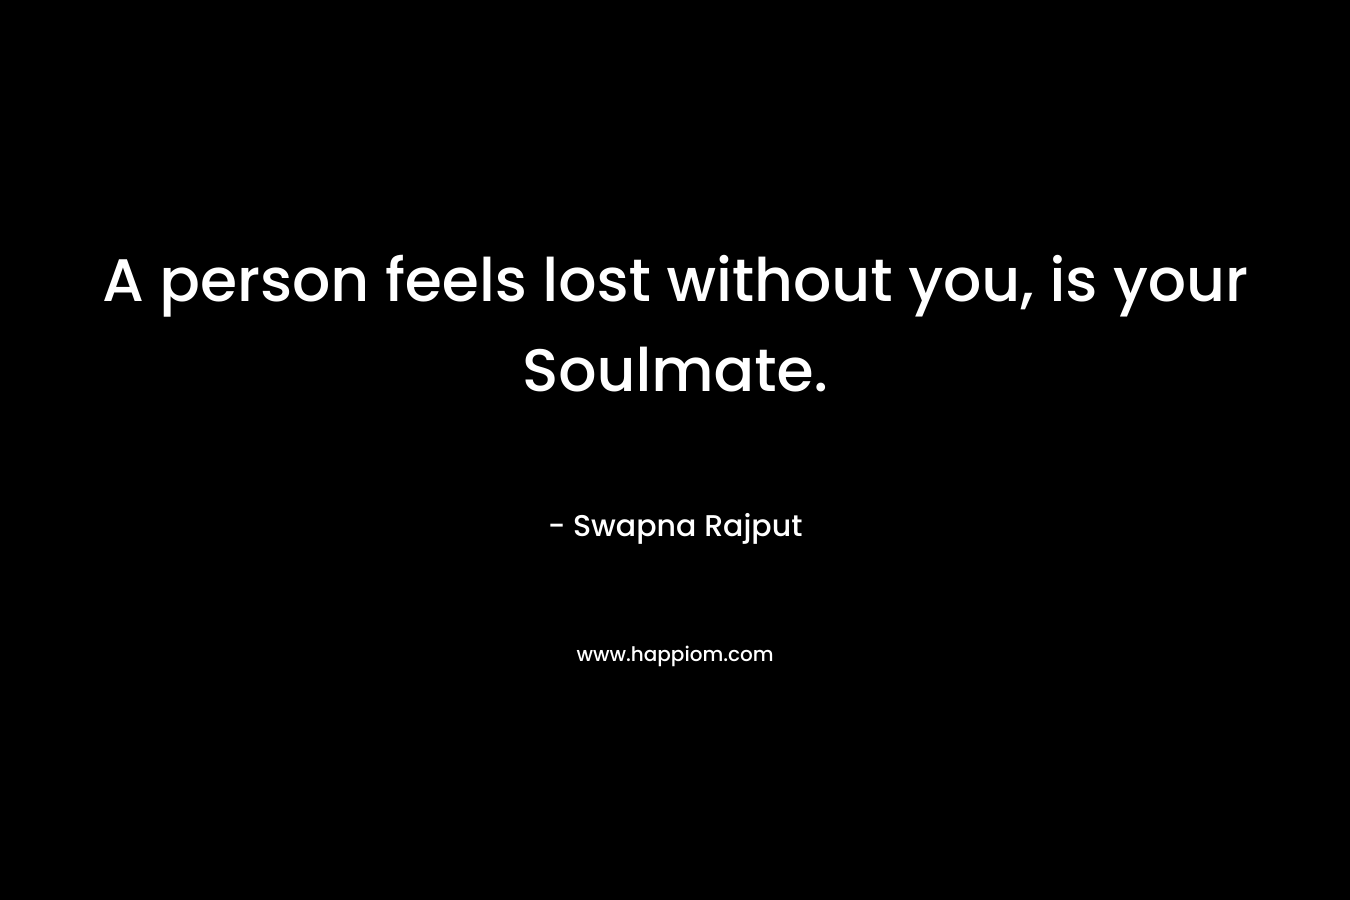 A person feels lost without you, is your Soulmate.